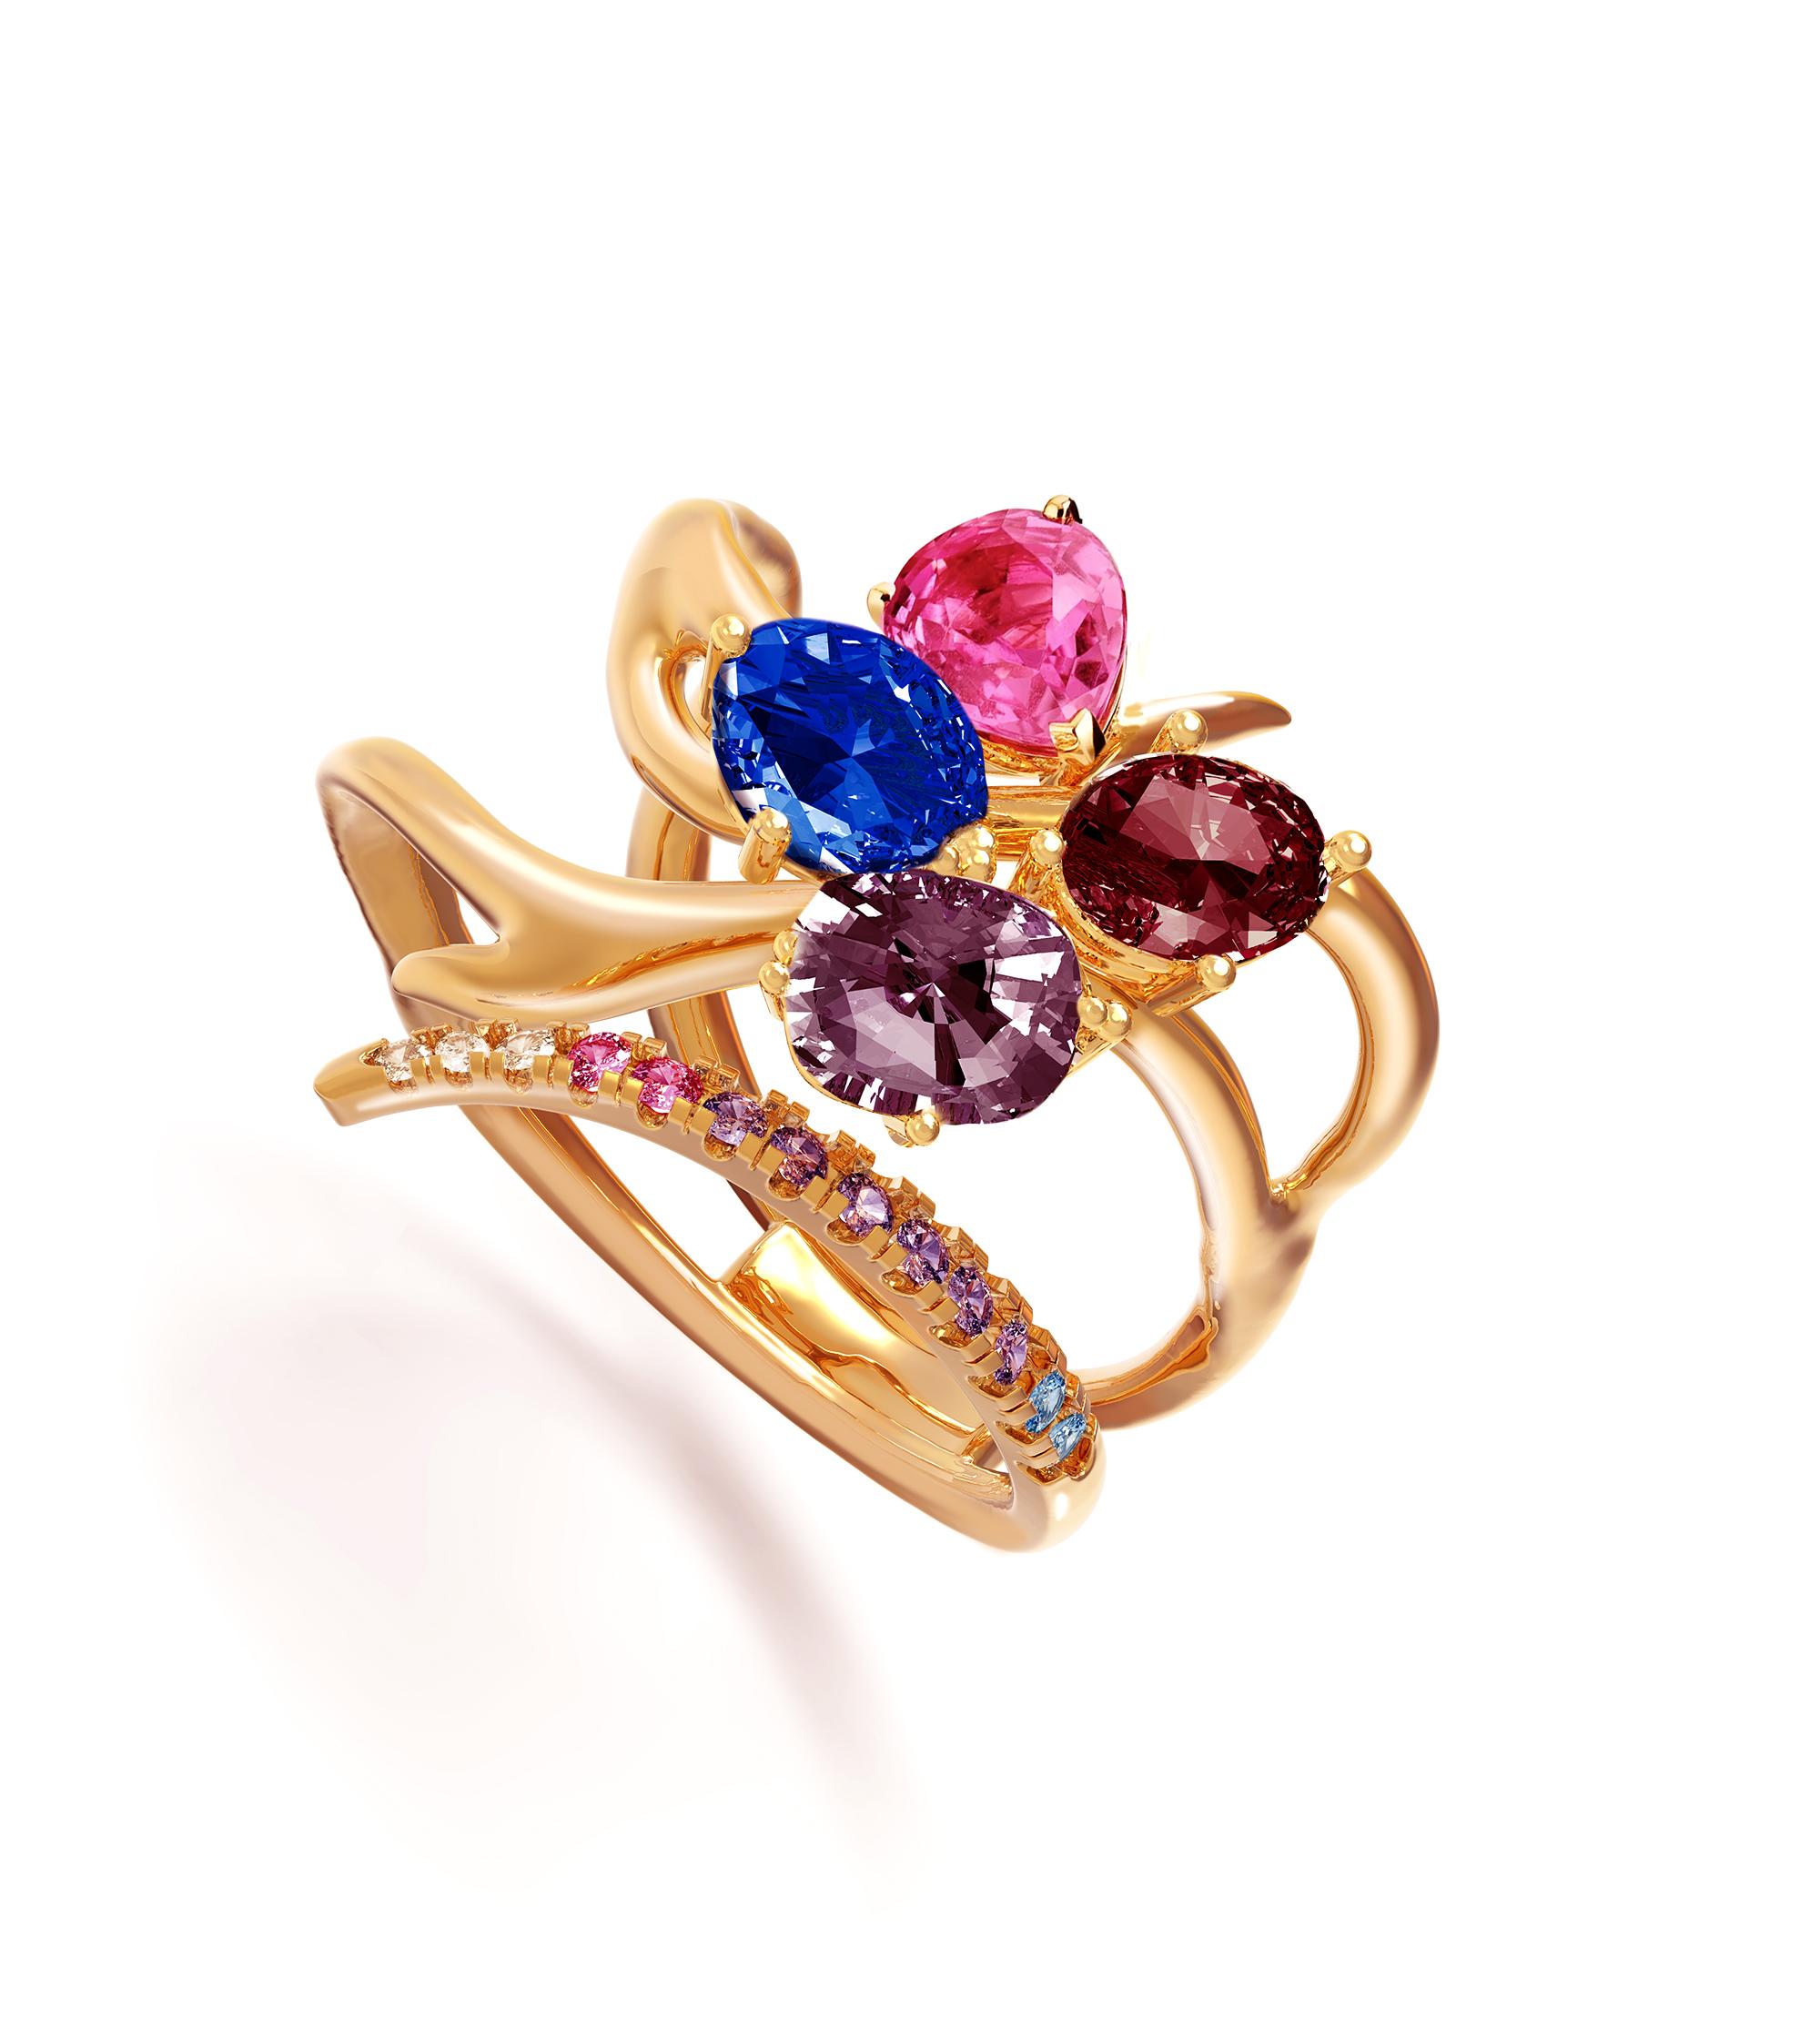 This Harajuku contemporary ring is made of 18 karat yellow gold with natural gems on your choice custom made.
The gems are:
Oval cut 2,65 carats natural unheated untreated vivid blue (royal blue) sapphire, GRS (Swiss Lab) certified, 8,58x6,93x5,27